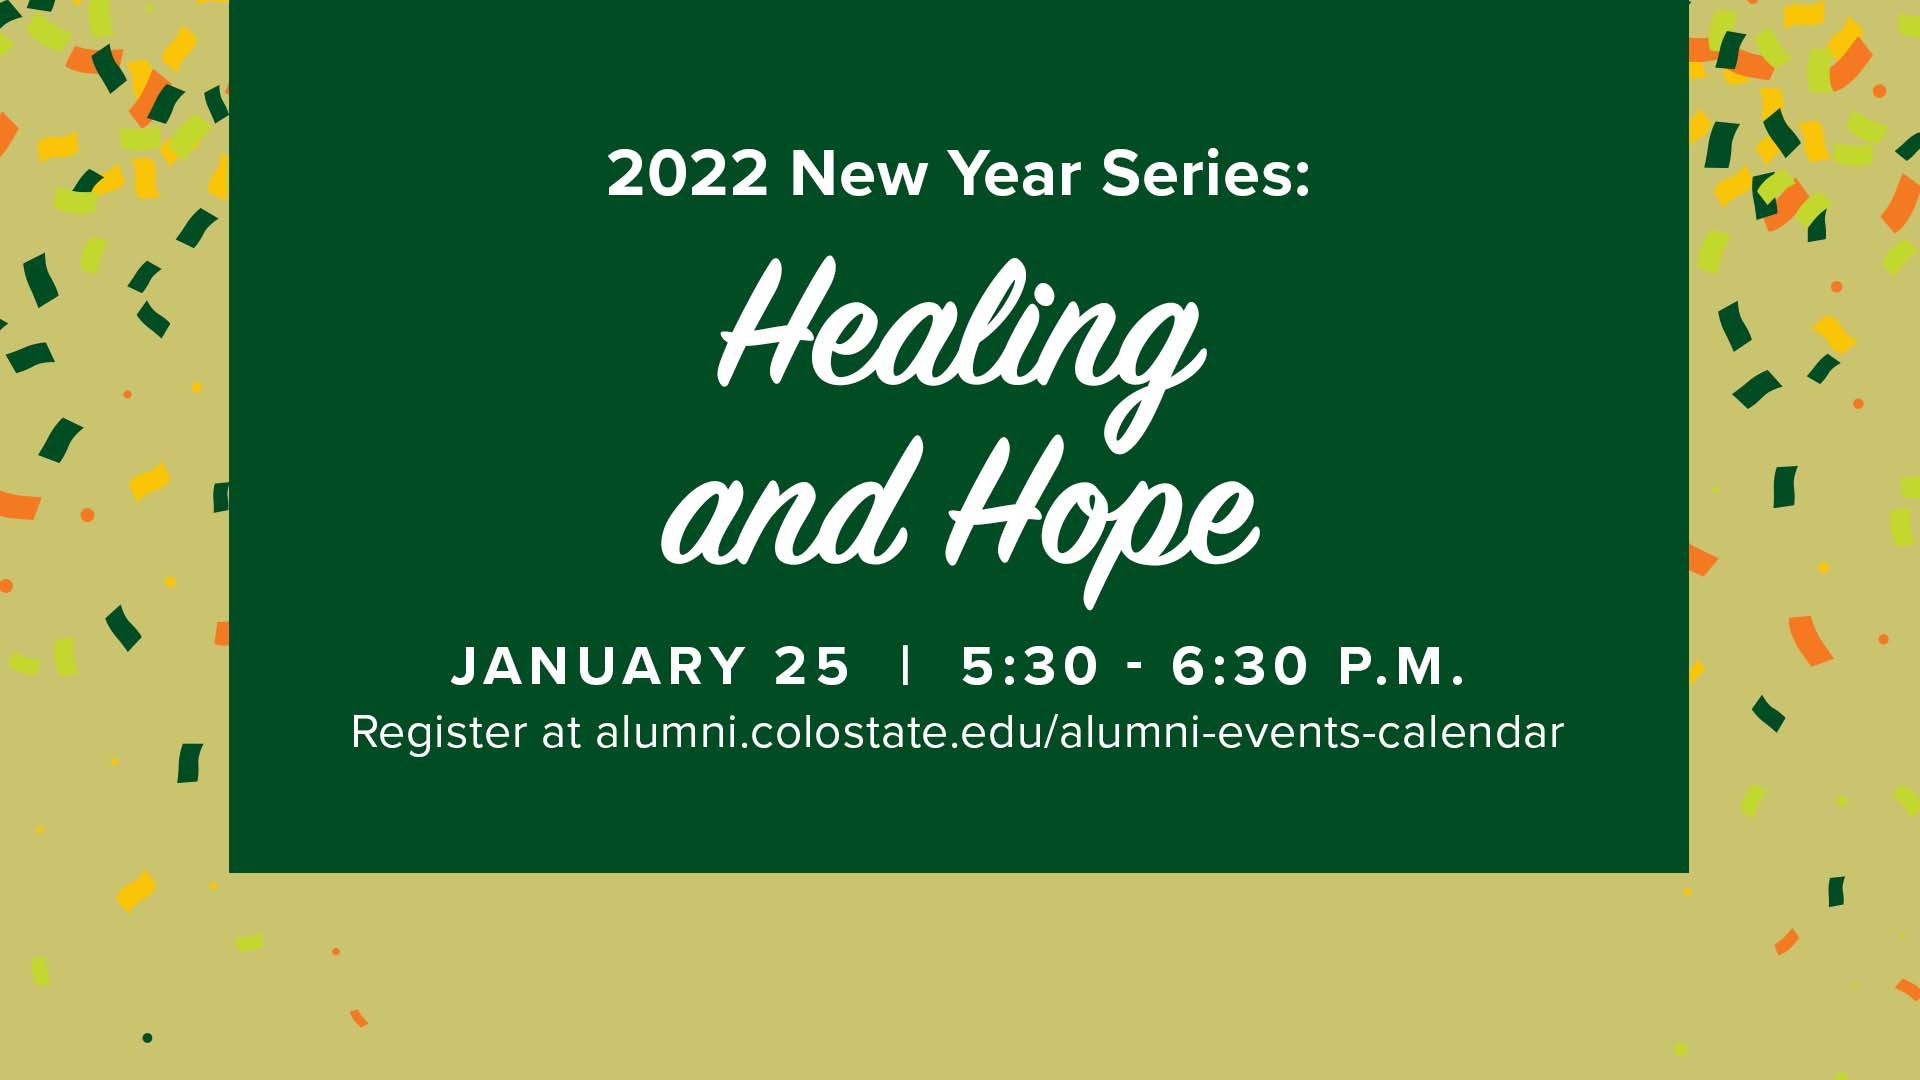 Image for New Year Series: Healing and Hope webinar